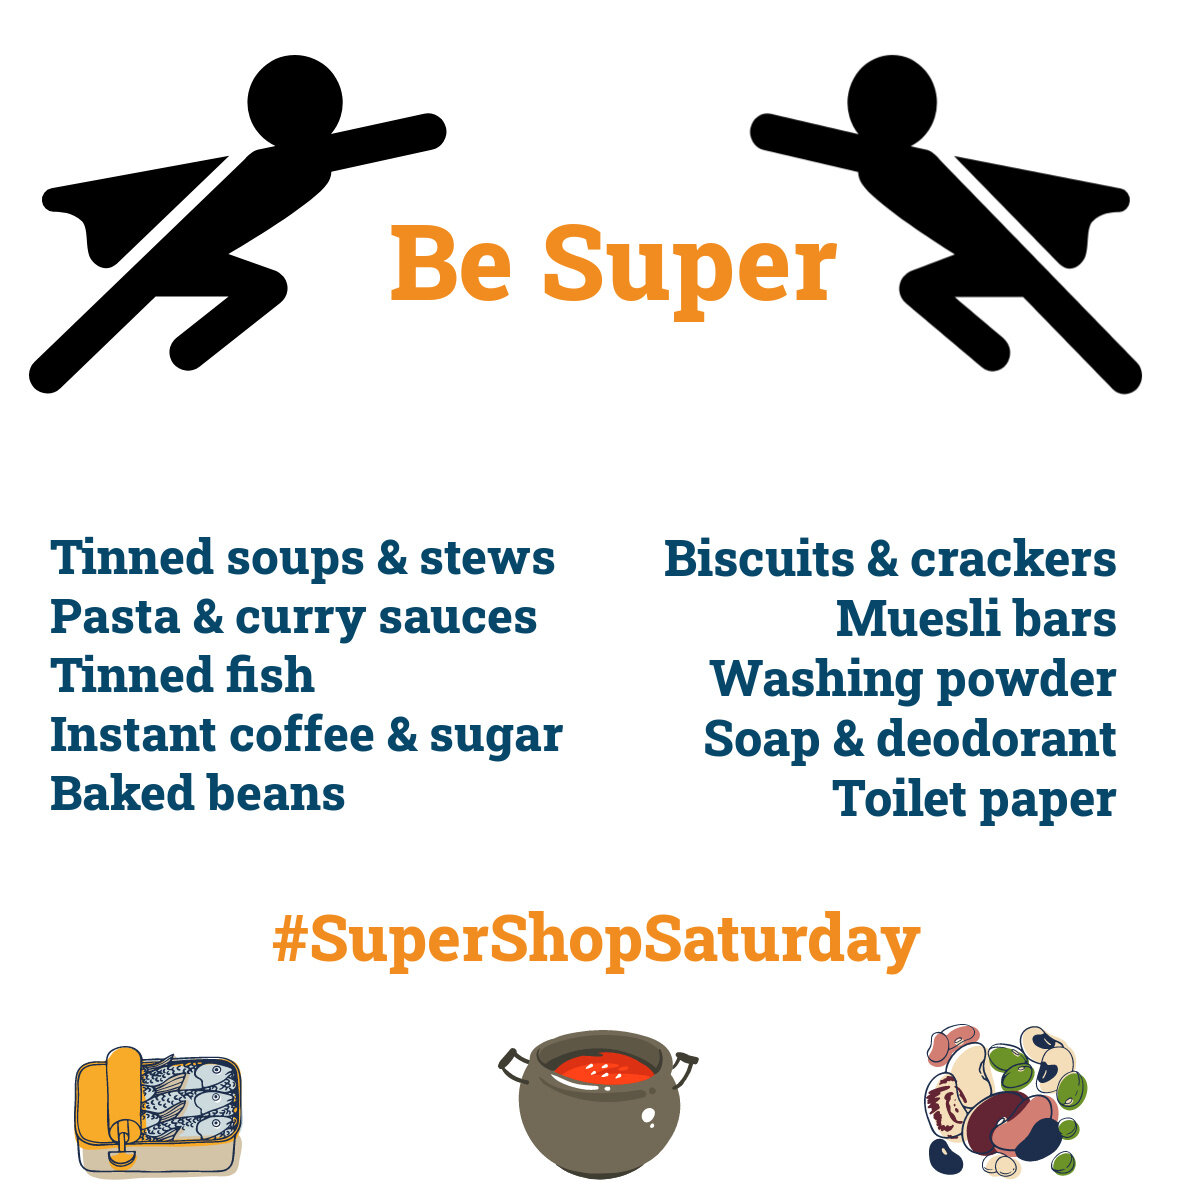 One week to go until our Foodbank Appeal. Next Saturday 27 May, be super and consider buying items for our food bank to make it a #SuperShopSaturday as we work to end homelessness together in our city. You can see what we most need highlighted in blu